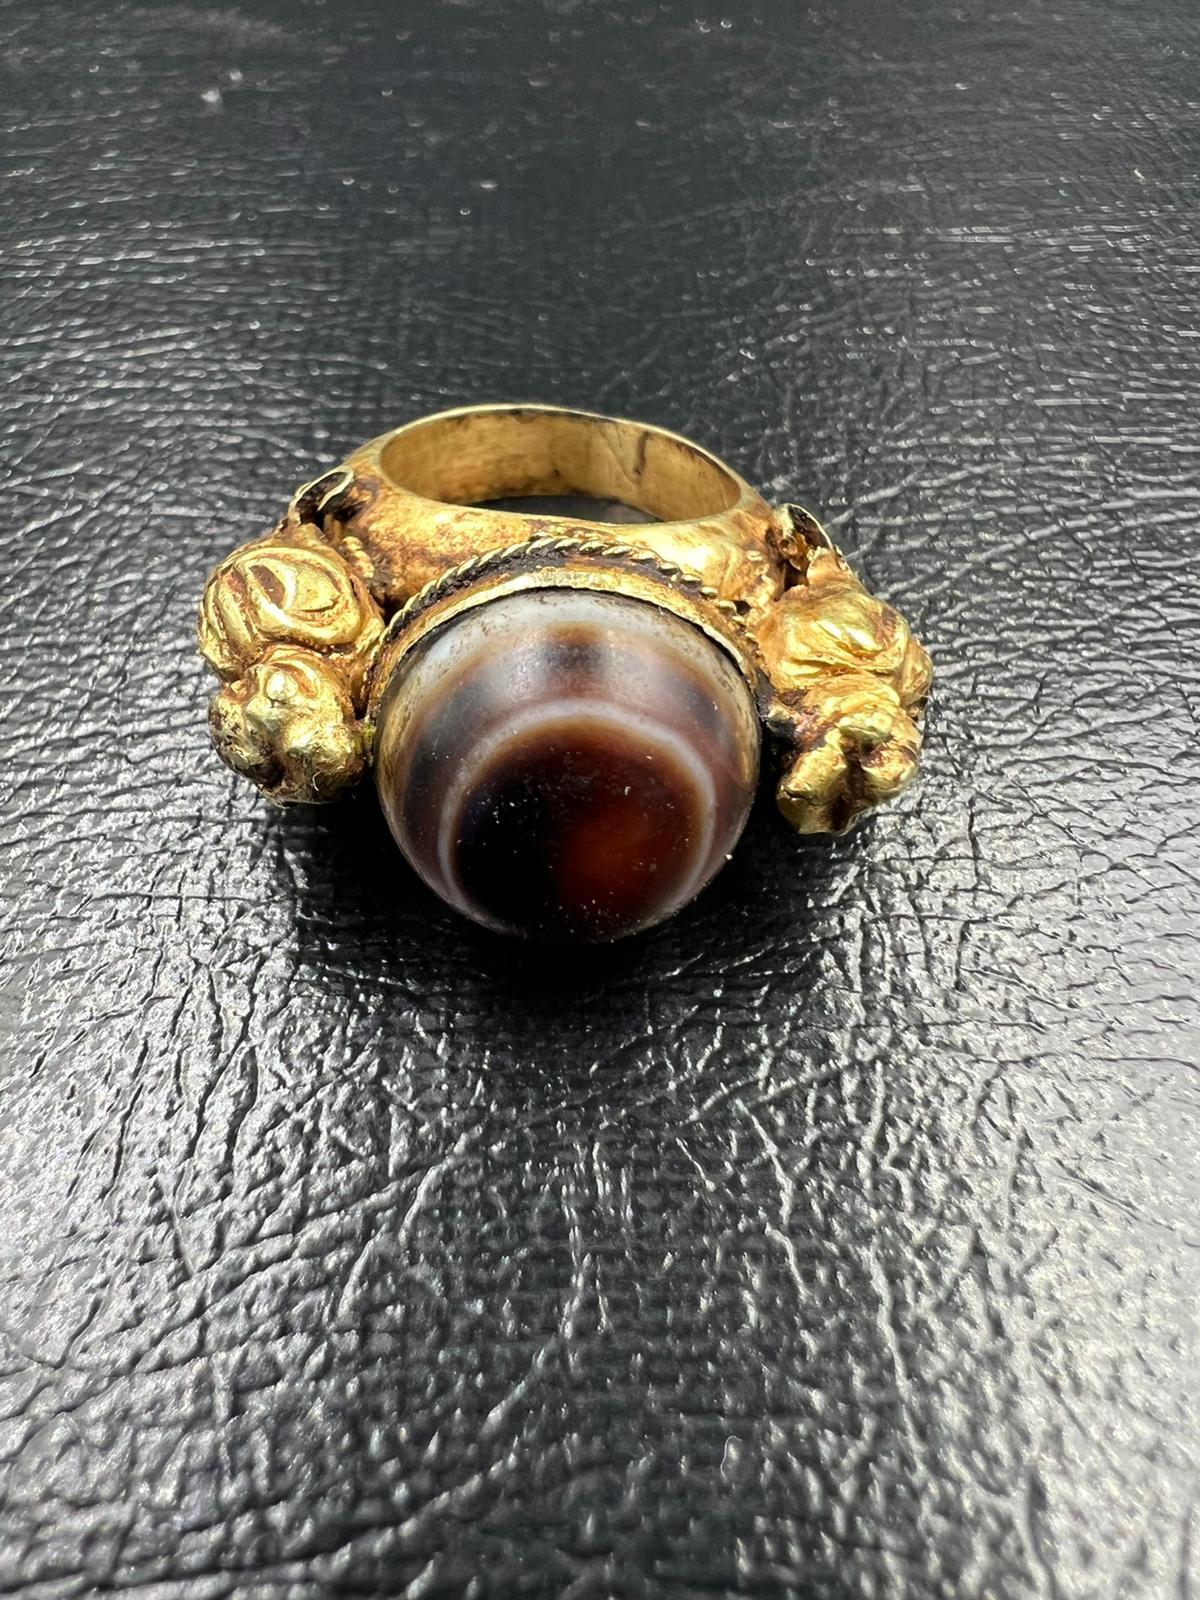 Bochic Curated Antique Ring From Burma 18k Solid Gold & Antique Agate 

This is the kind of ring you see in a Museum
South East Asian Antique Agate Gem Old Burmese Pyu Pagan Gold Ring

This Ring is from the 